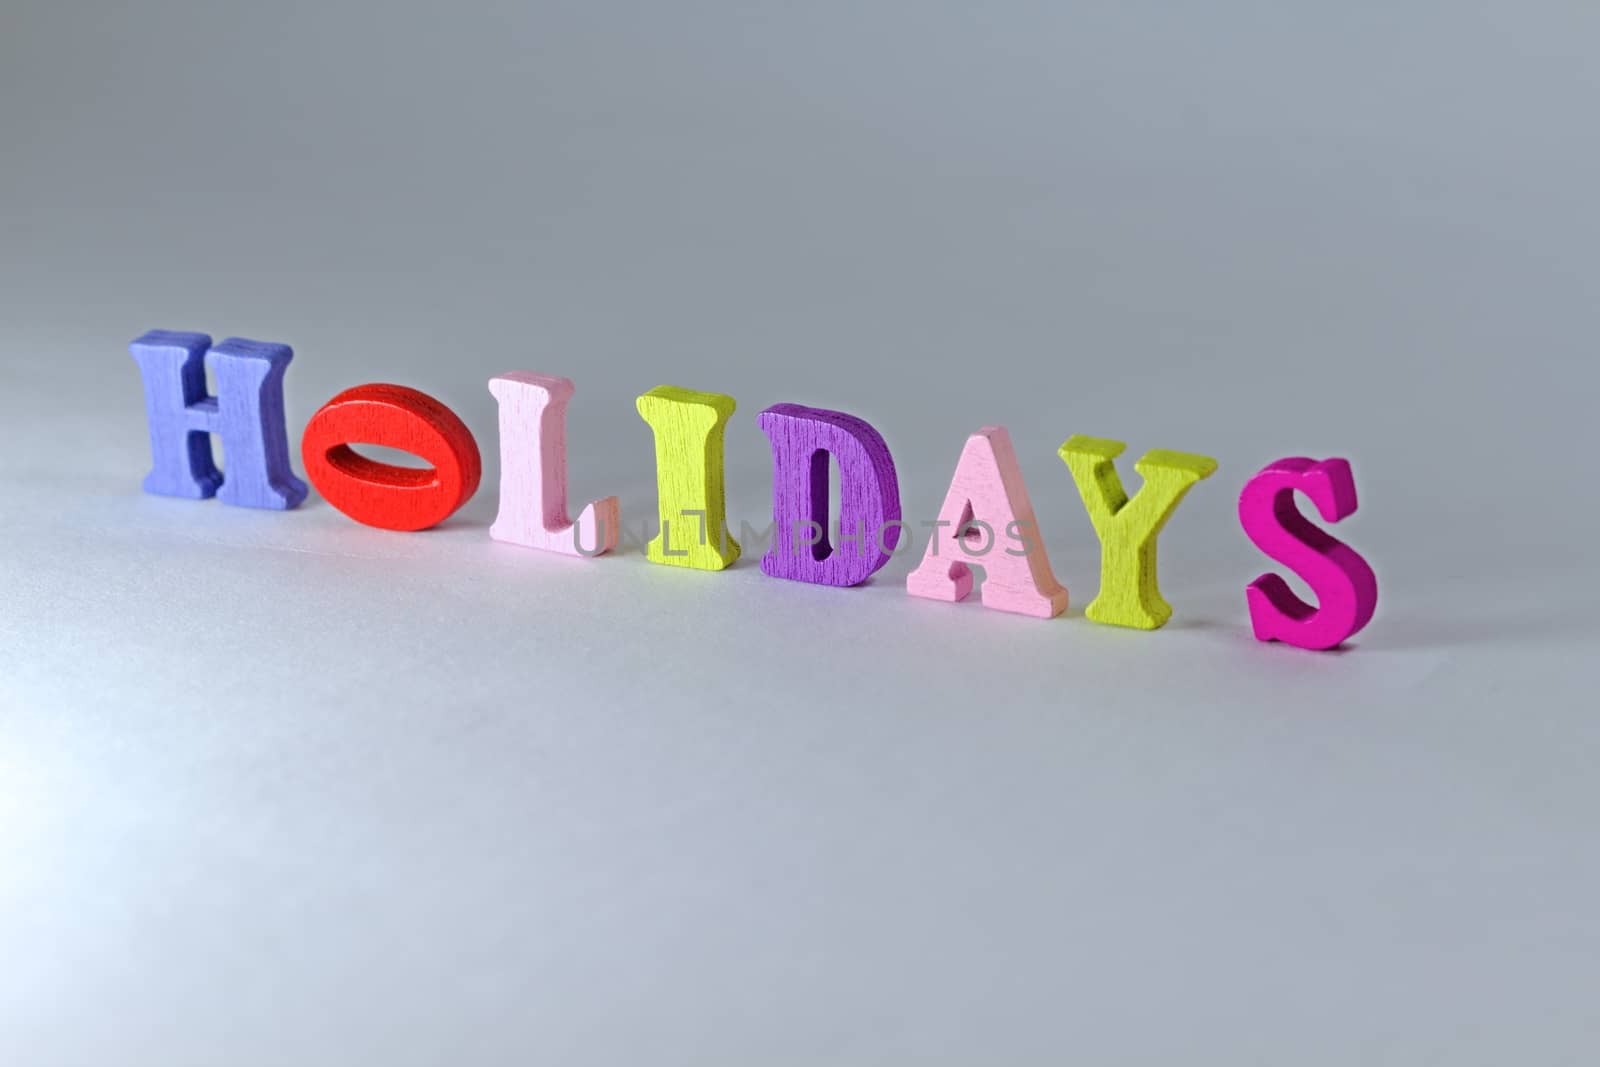 Photo shows detail of holidays sign on white background.